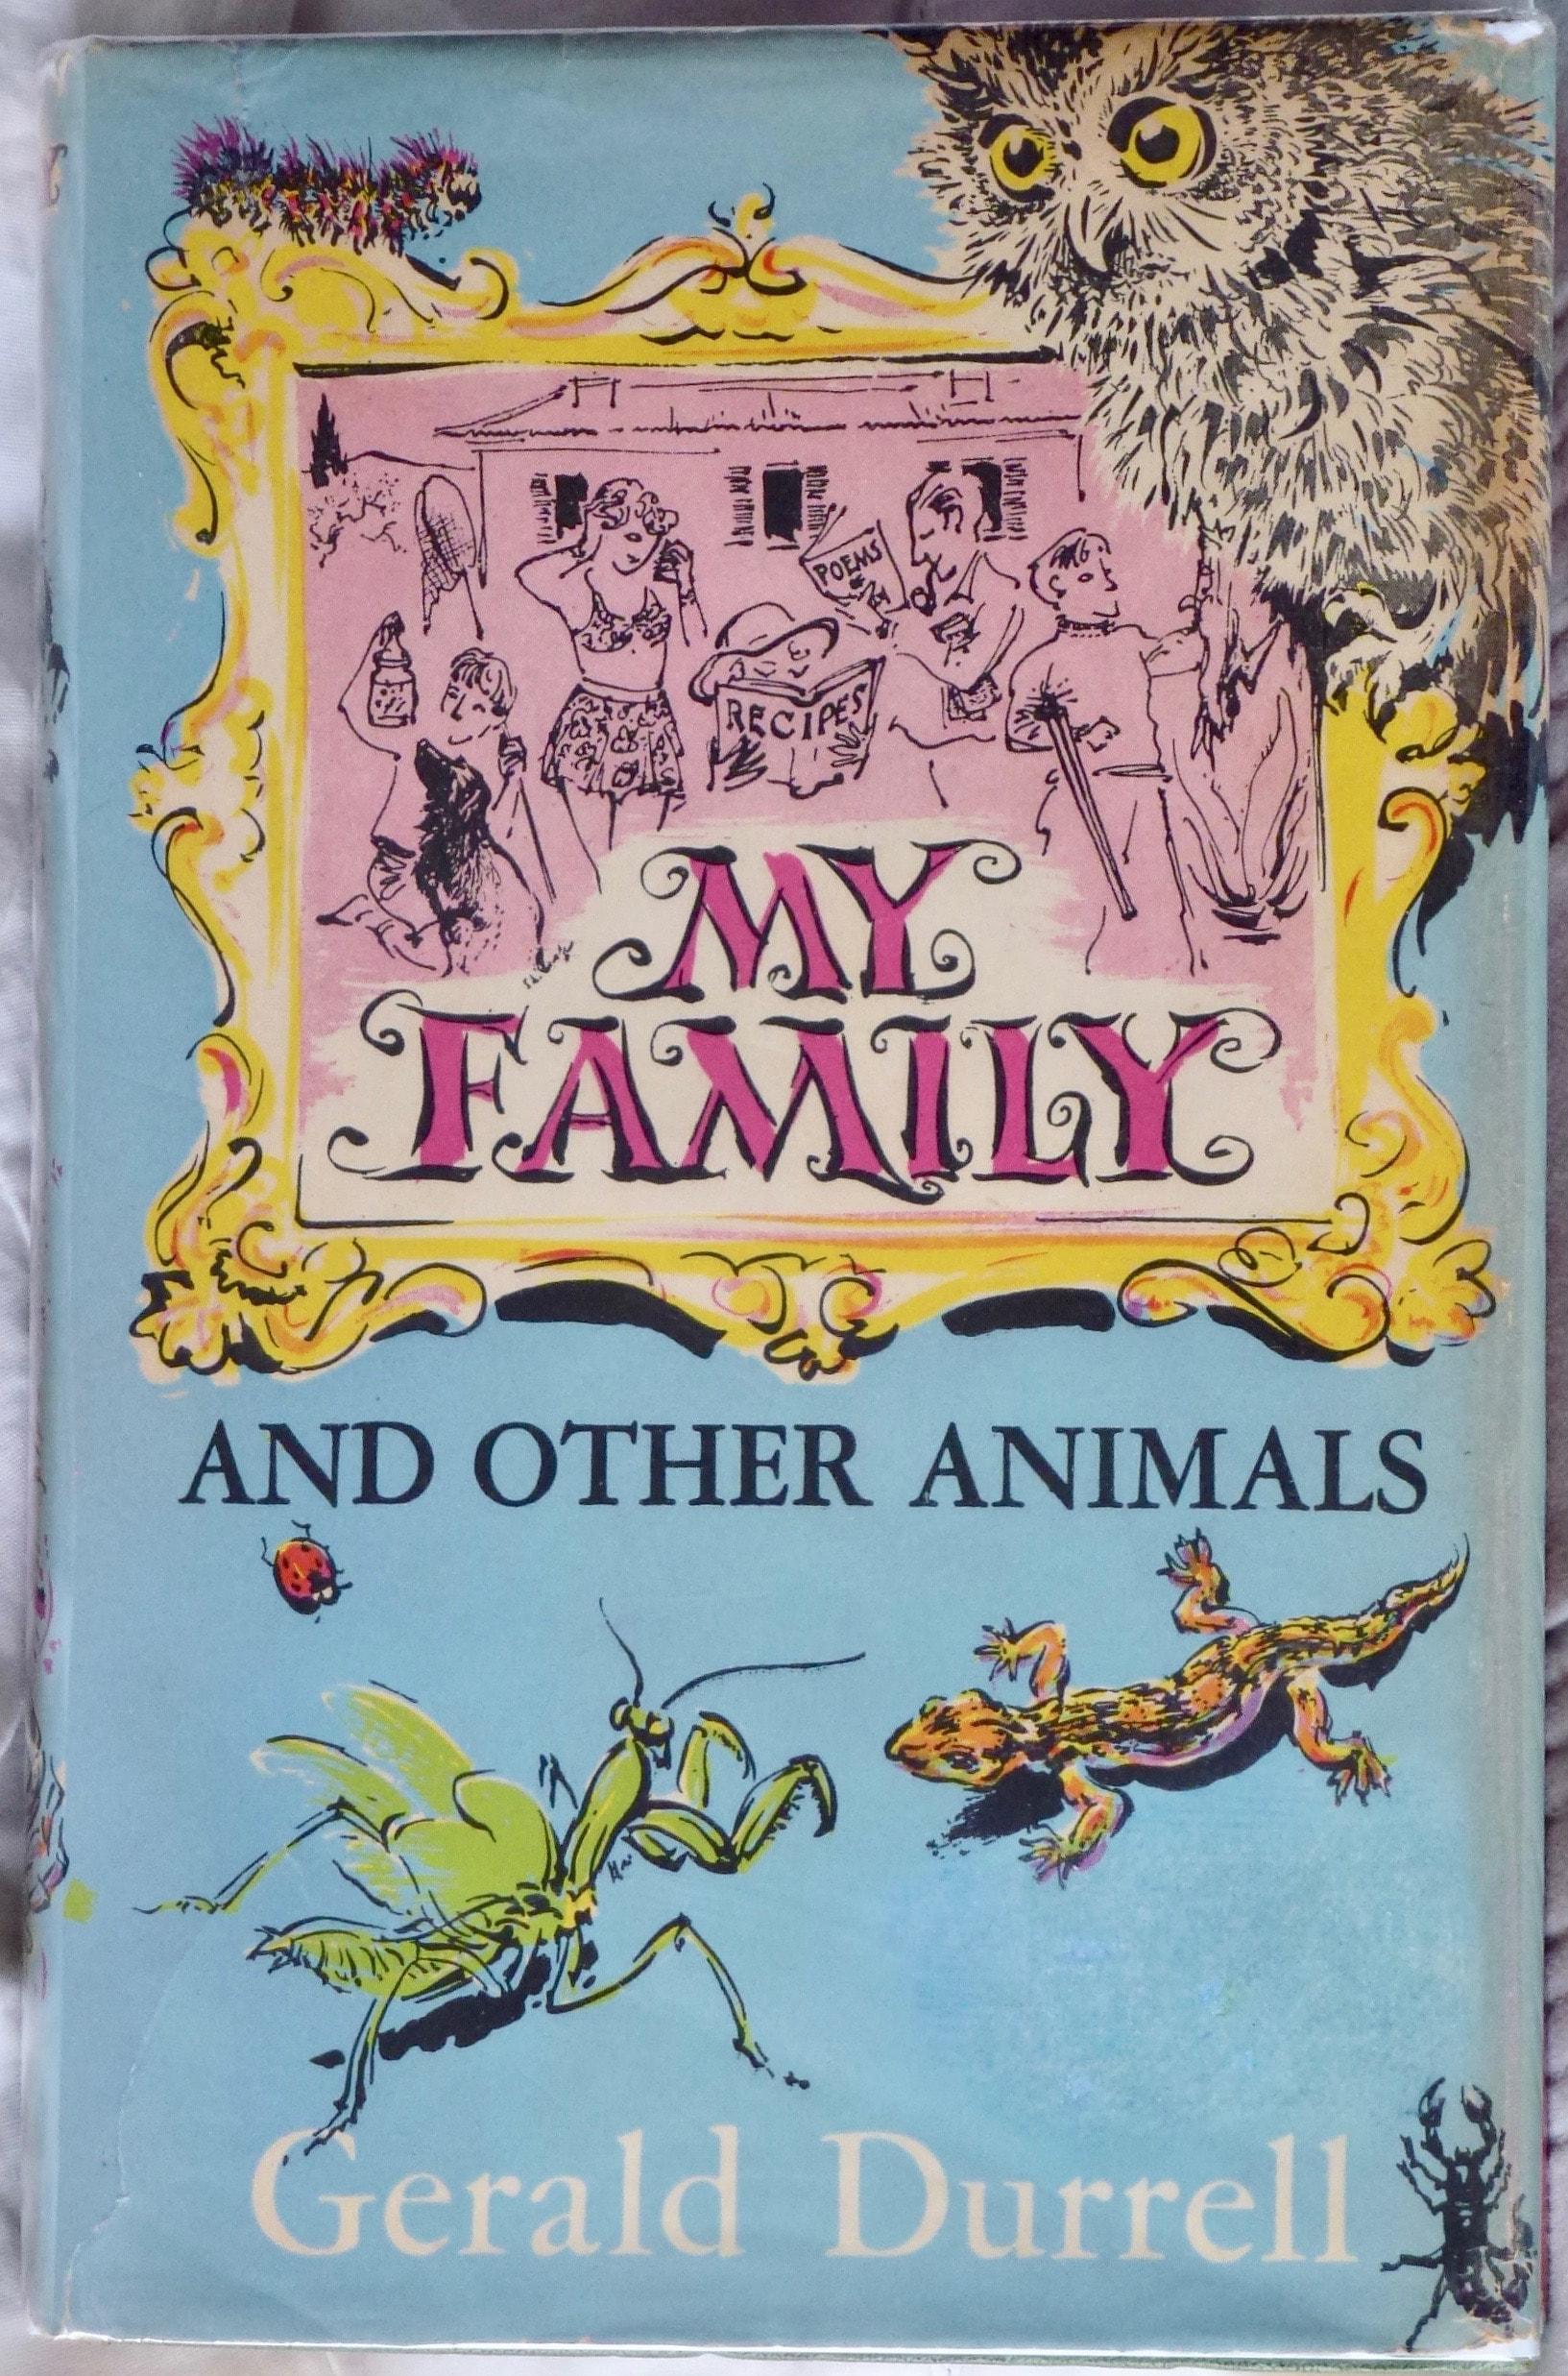 My Family And Other Animals